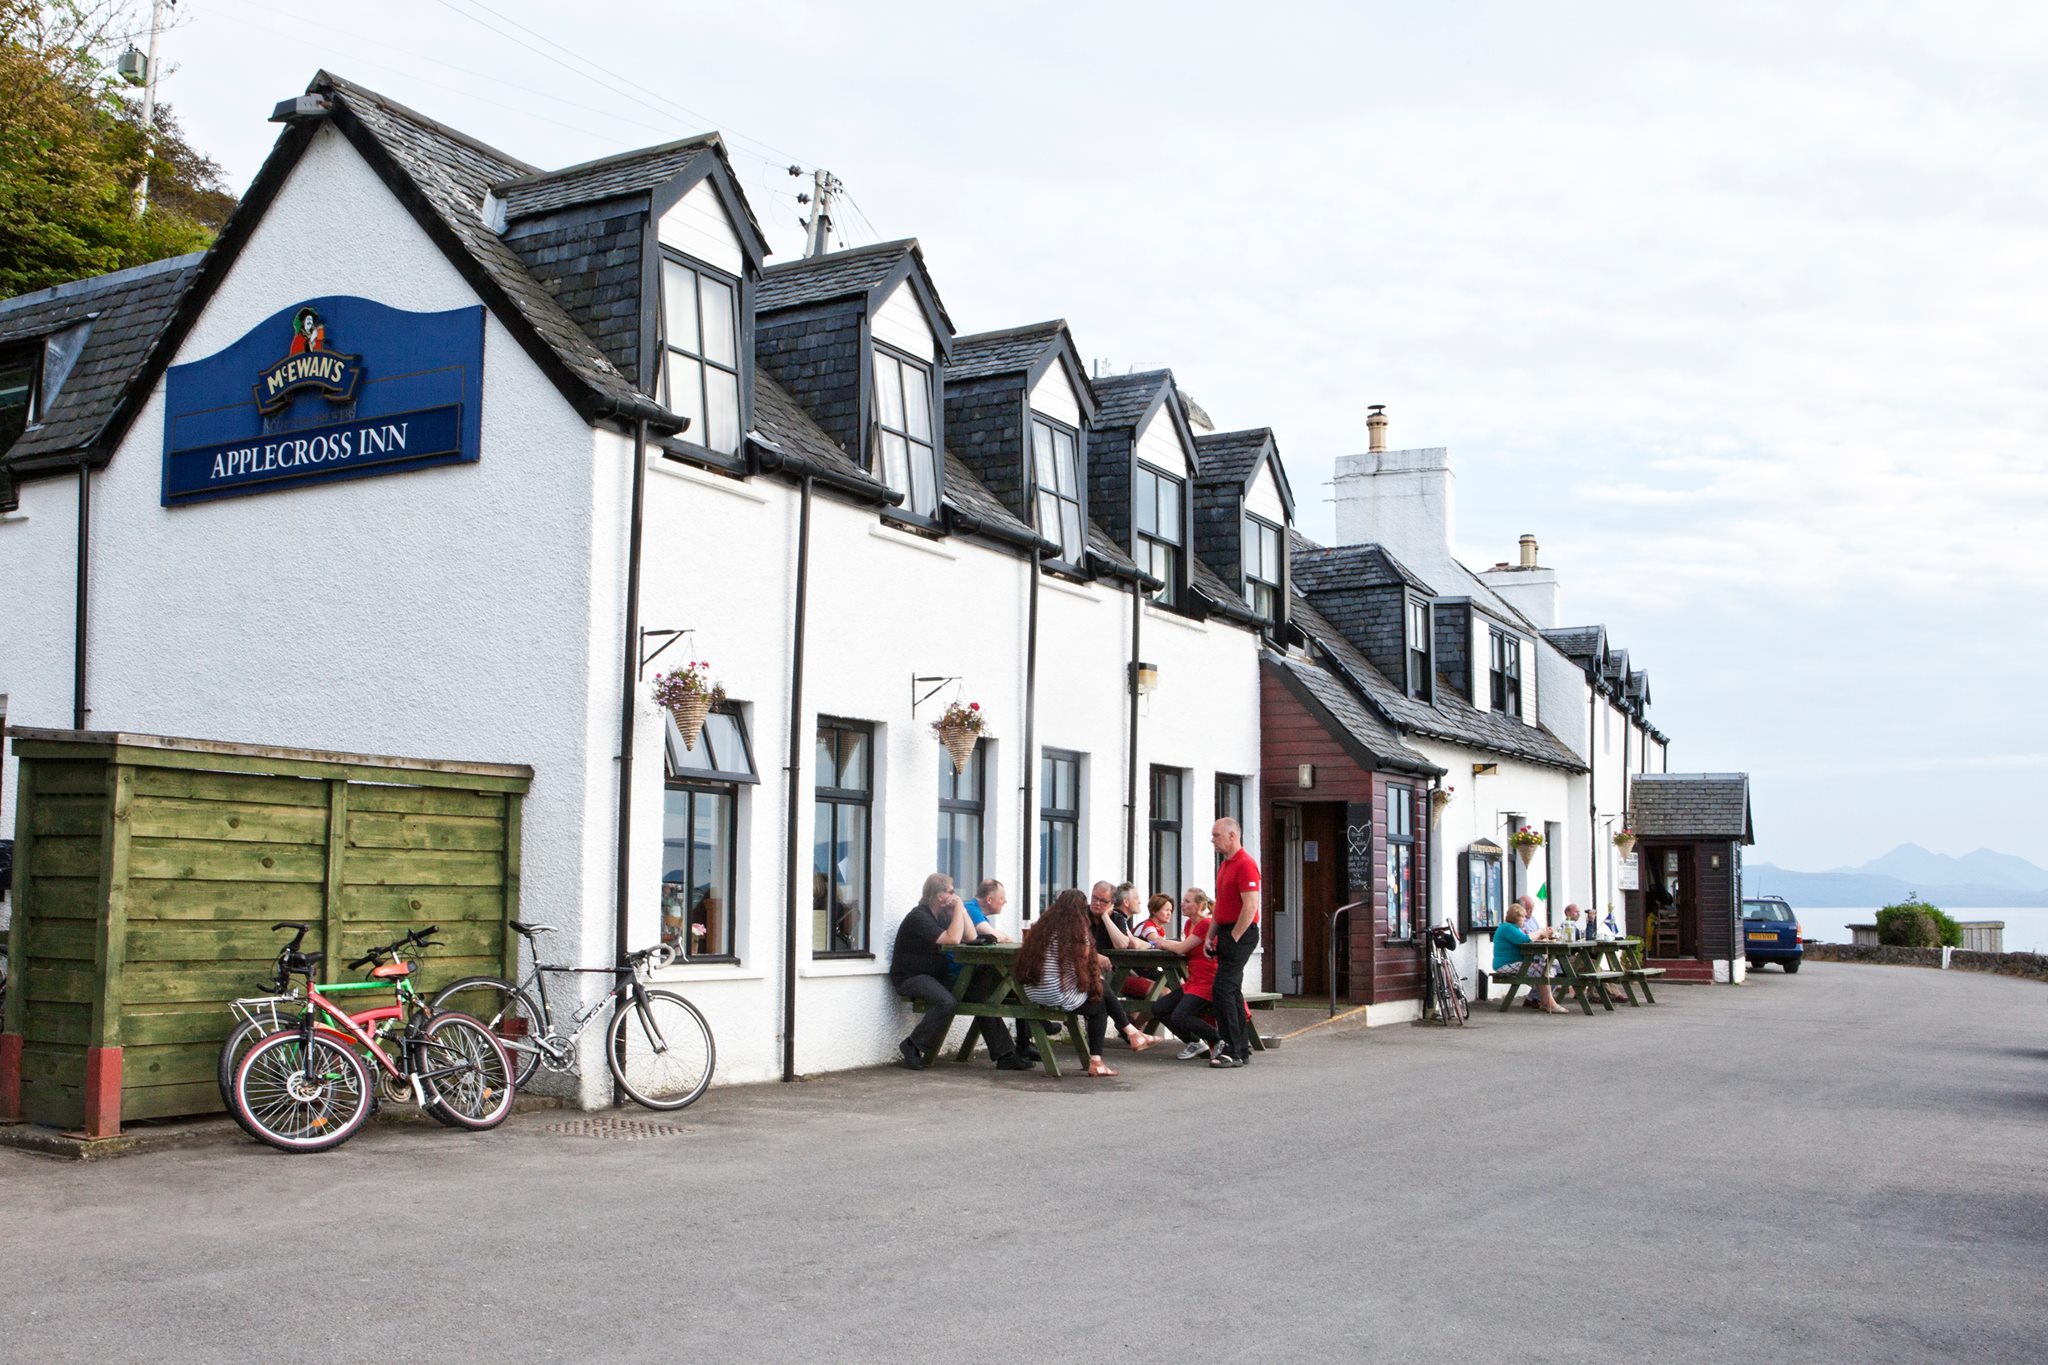 Applecross Inn - the best fish and chips in Scotland